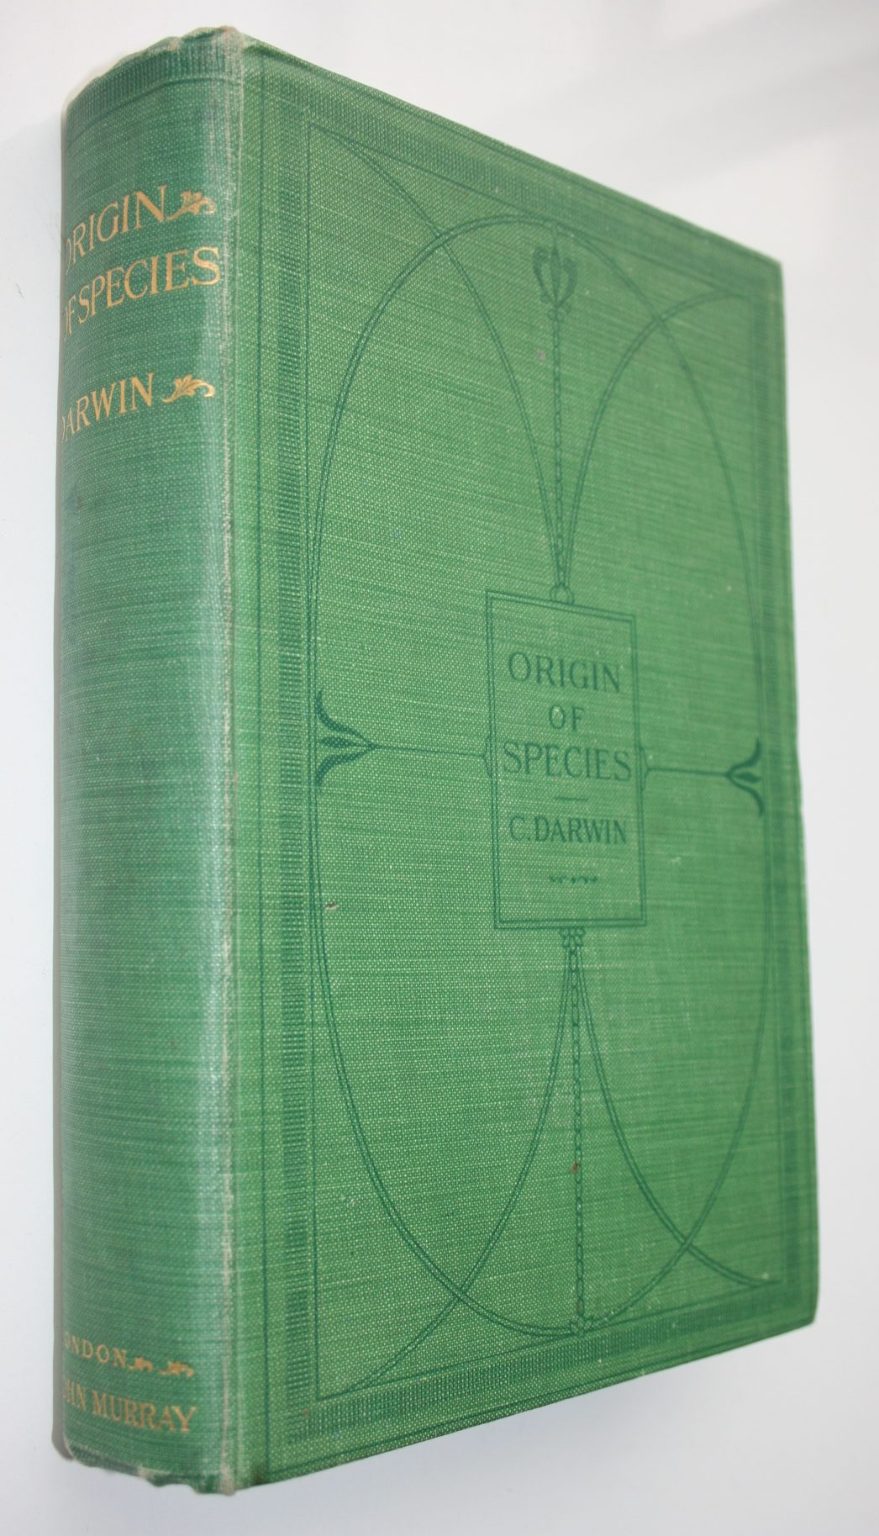 Origin of Species by Means of Natural Selection or the Preservation of Favoured Races in the Struggle for Life by Charles Darwin. (1900)